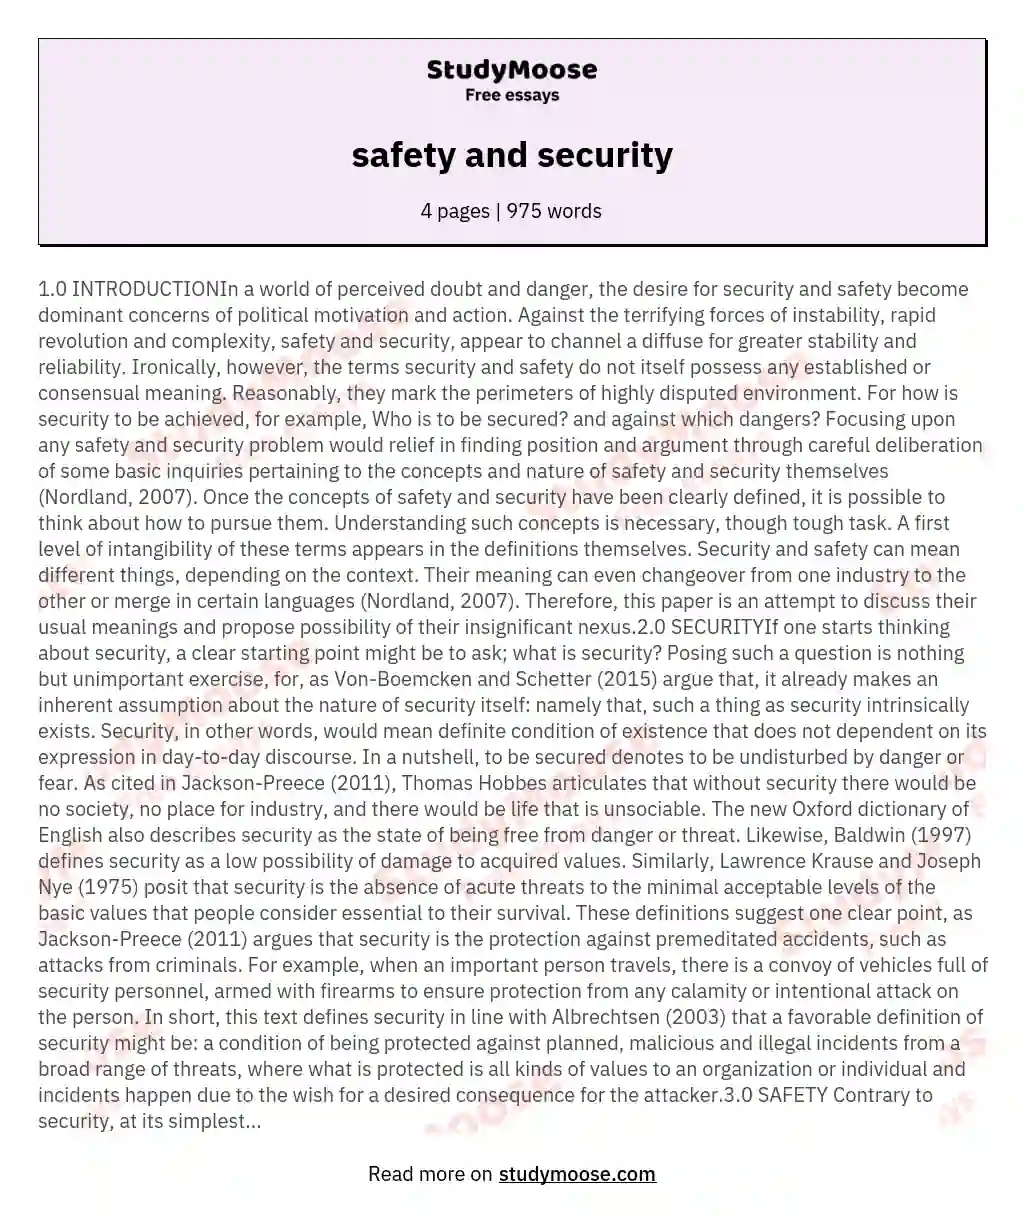 importance of safety and security essay